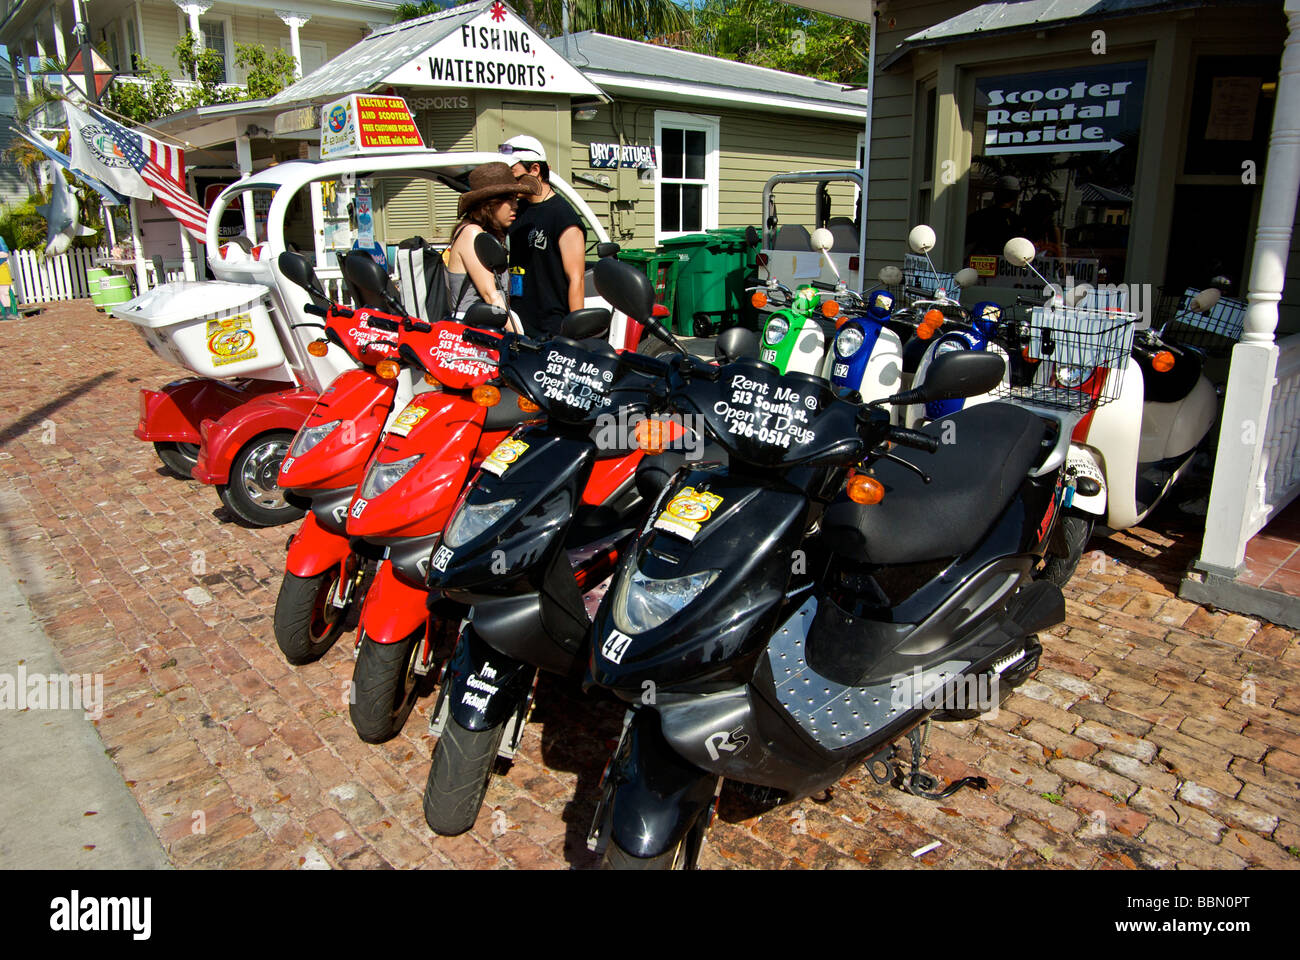 Tourist couple looking over bright scooters to rent at rental for touring Key West Stock - Alamy